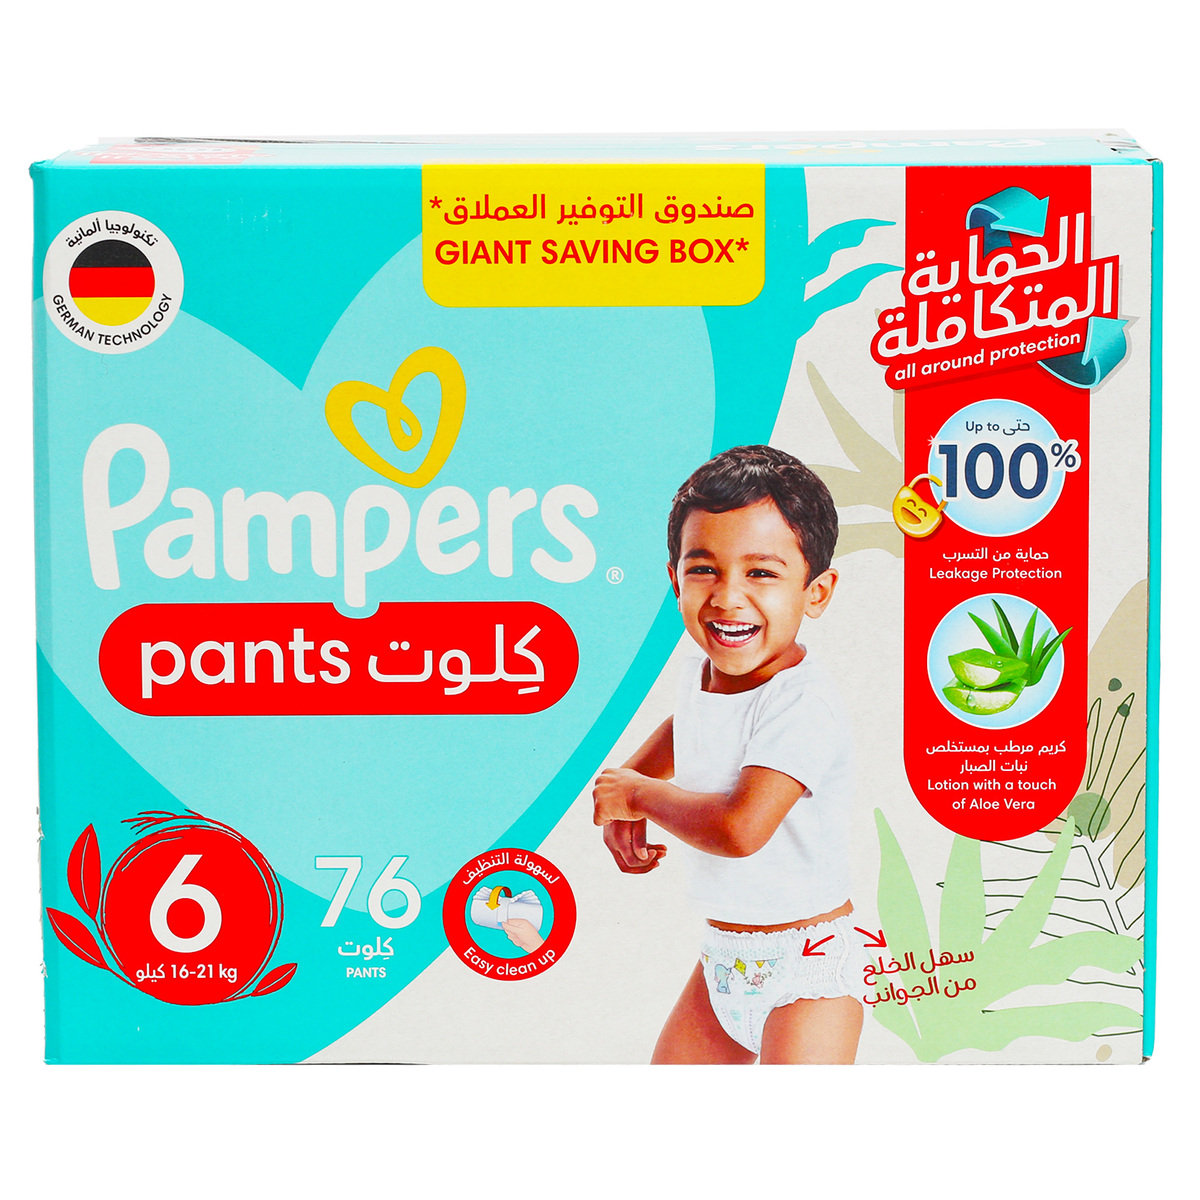 Buy Pampers Diaper Pants Size 6 16-21kg Value Pack 76 pcs Online at Best Price | Baby Nappies | Lulu Kuwait in Kuwait